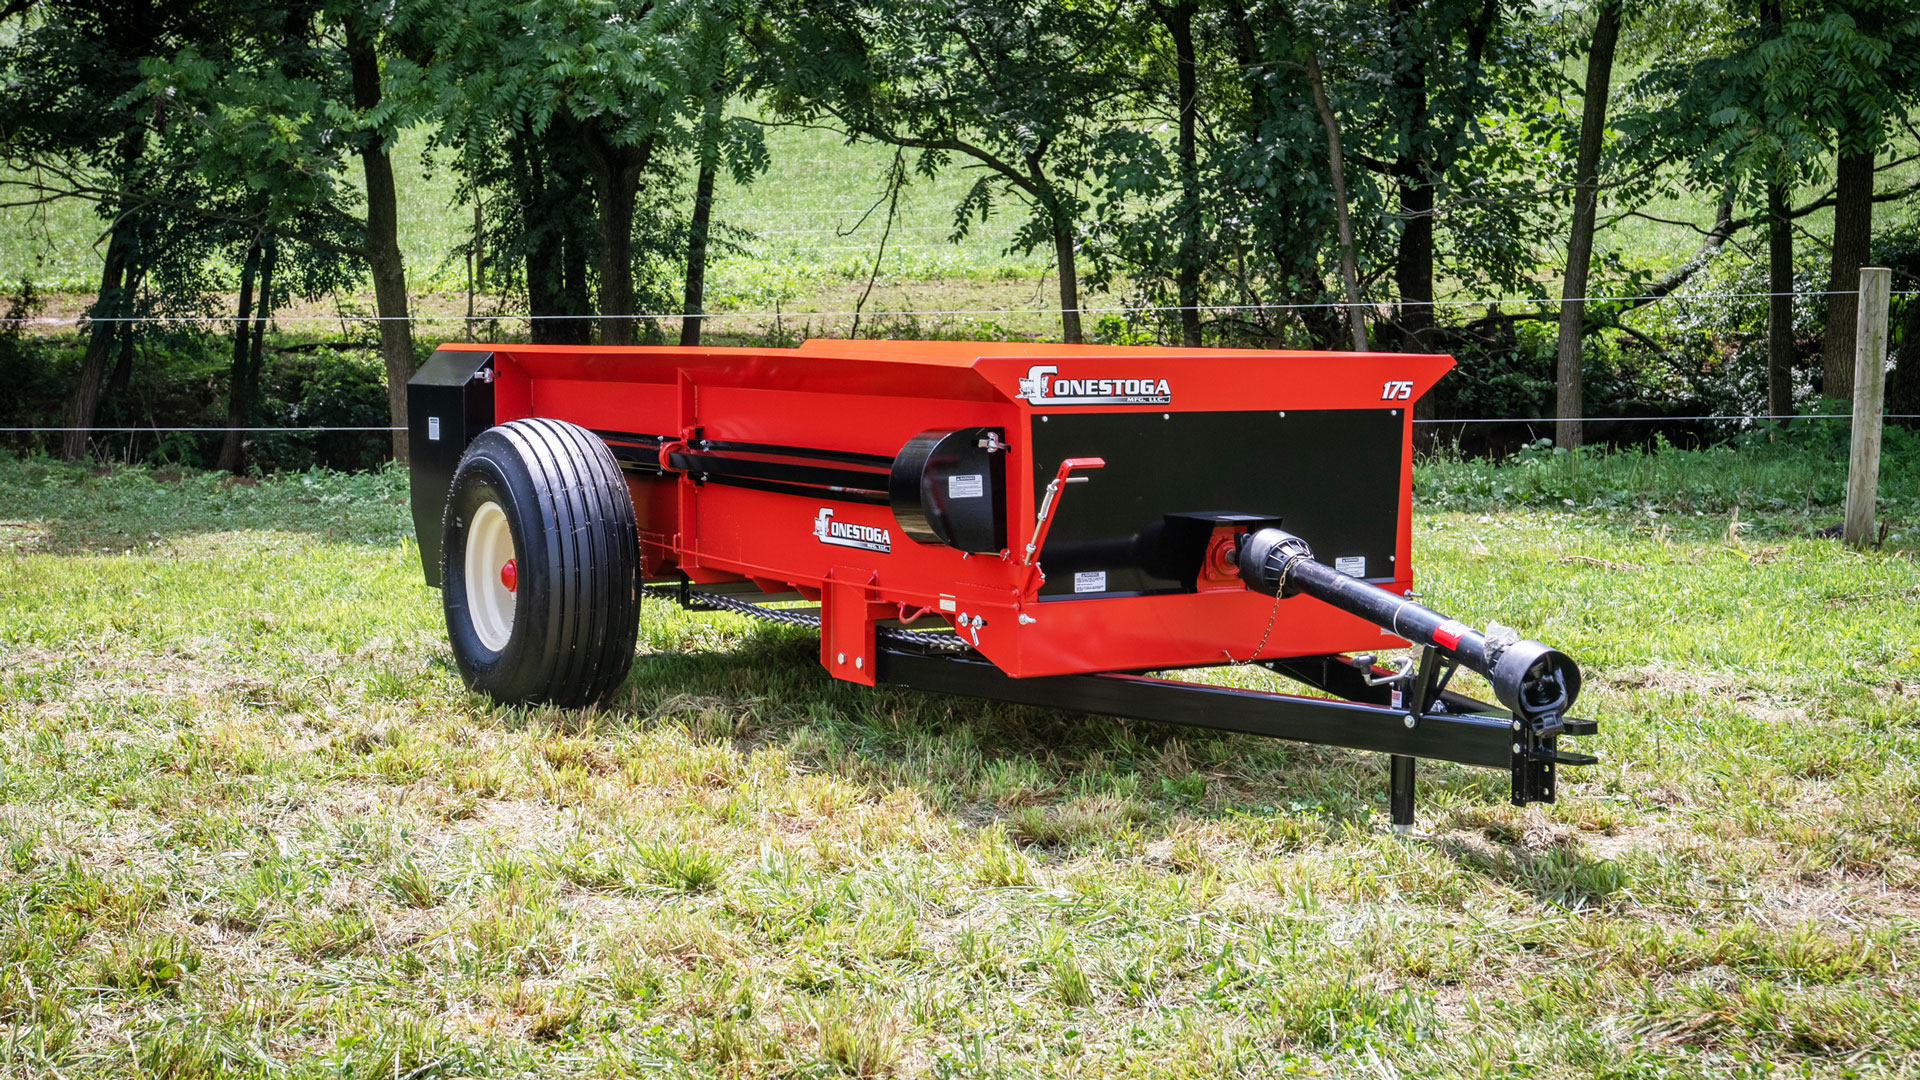 7 questions to ask before you buy a manure spreader conestoga manure spreaders 8